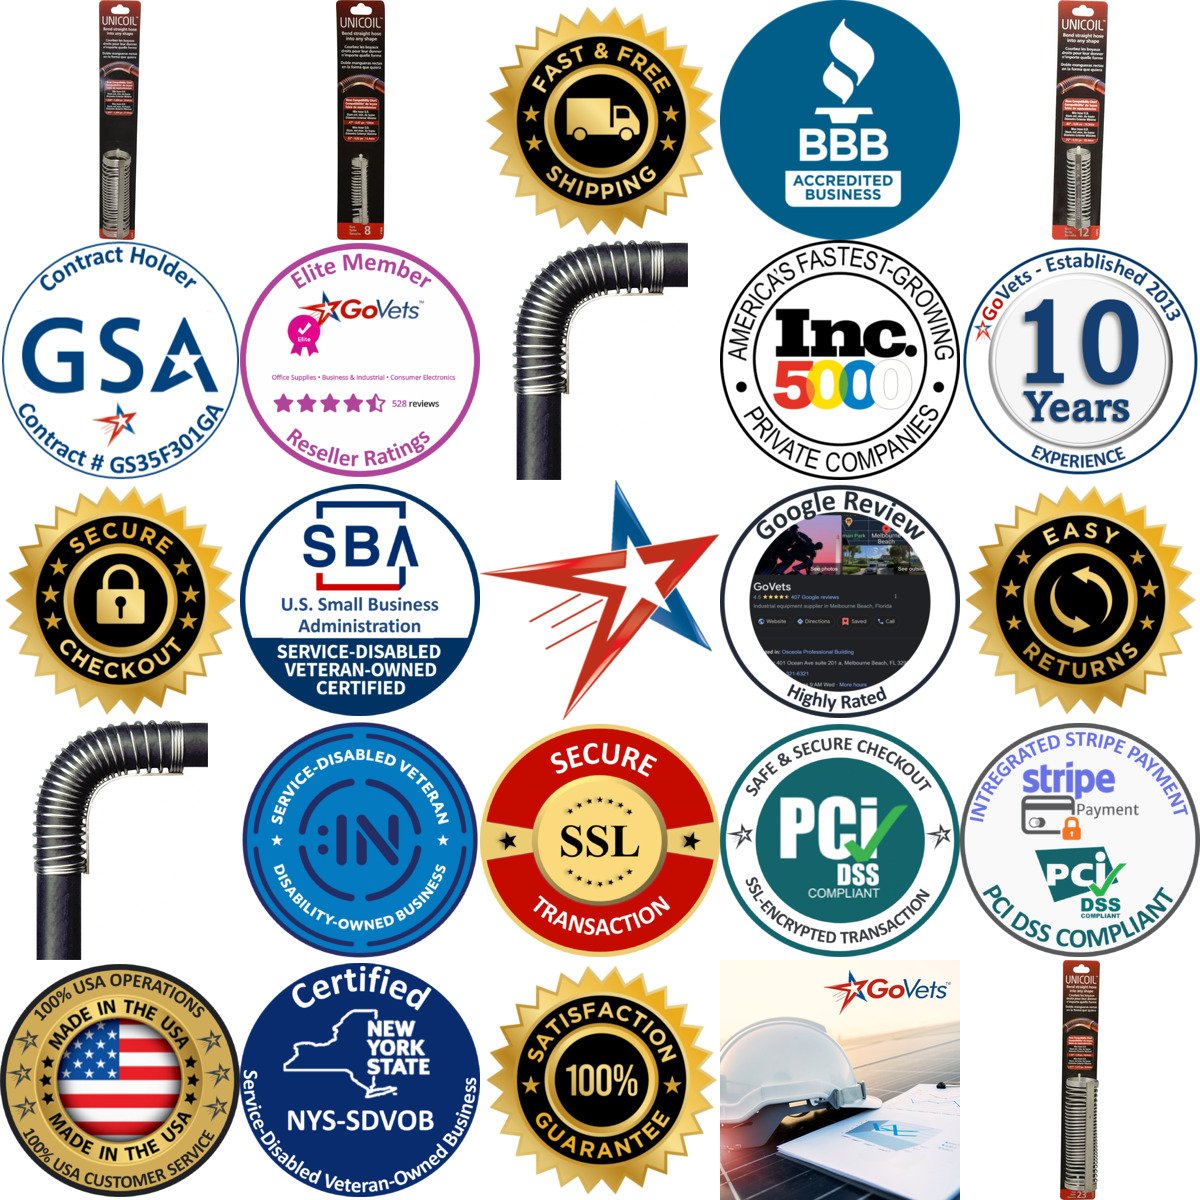 A selection of Hose Benders products on GoVets